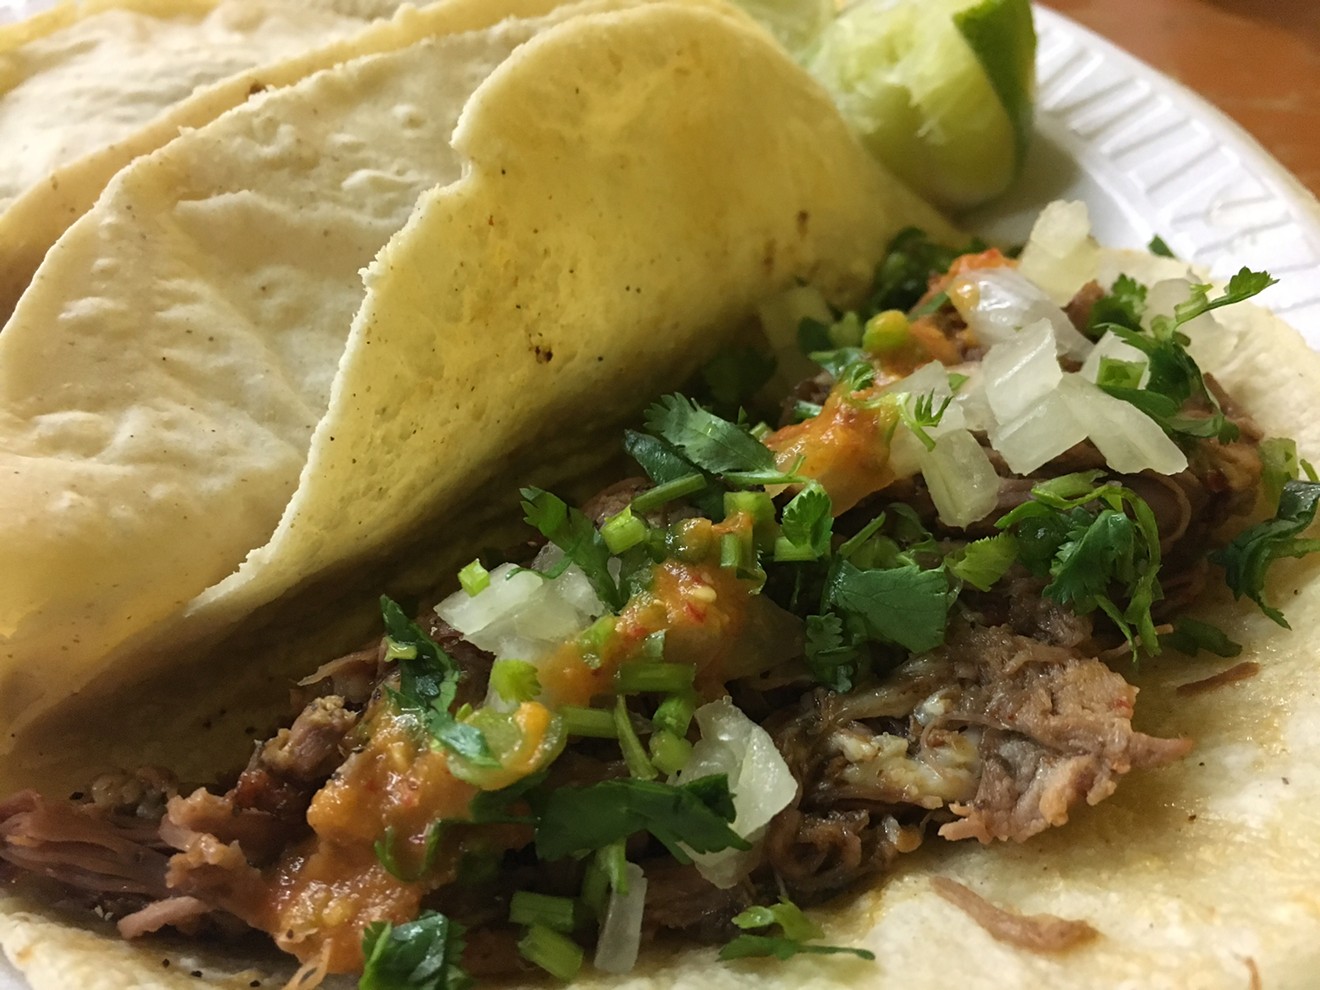 These barbacoa tacos are some of the best in Dallas.